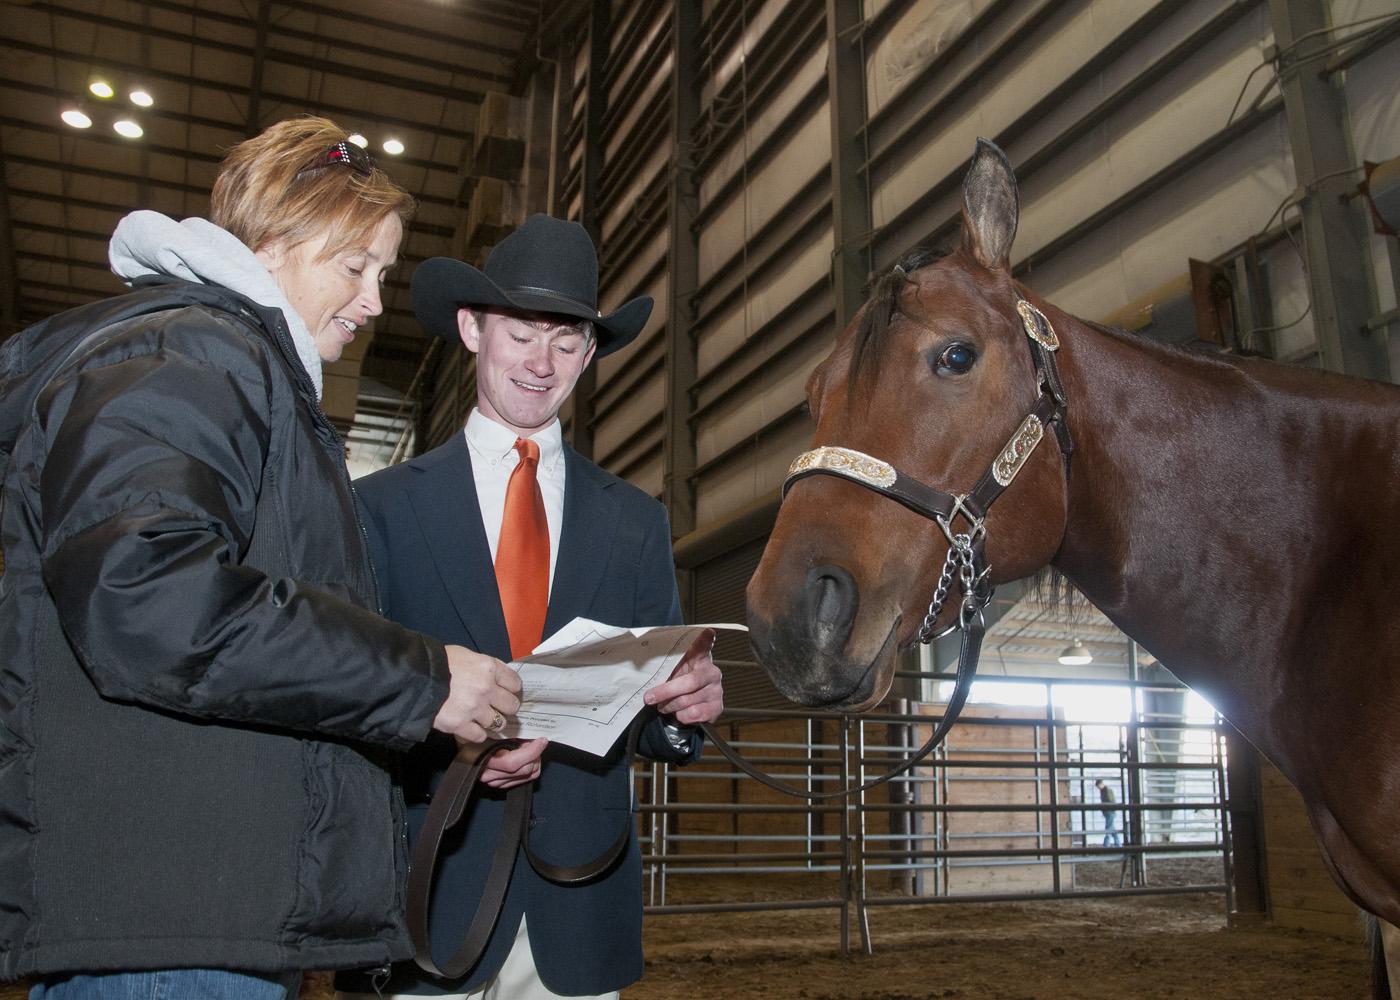 Union County 4-H youth agent Gina Wills and 4-H member Bobby May of Marshall County review the show schedule for the Winter Classic Horse Show held at the Mississippi Horse Park near Starkville. May and his horse, Jack, took part in the series of off-season shows from January through March. (Photo by Scott Corey)